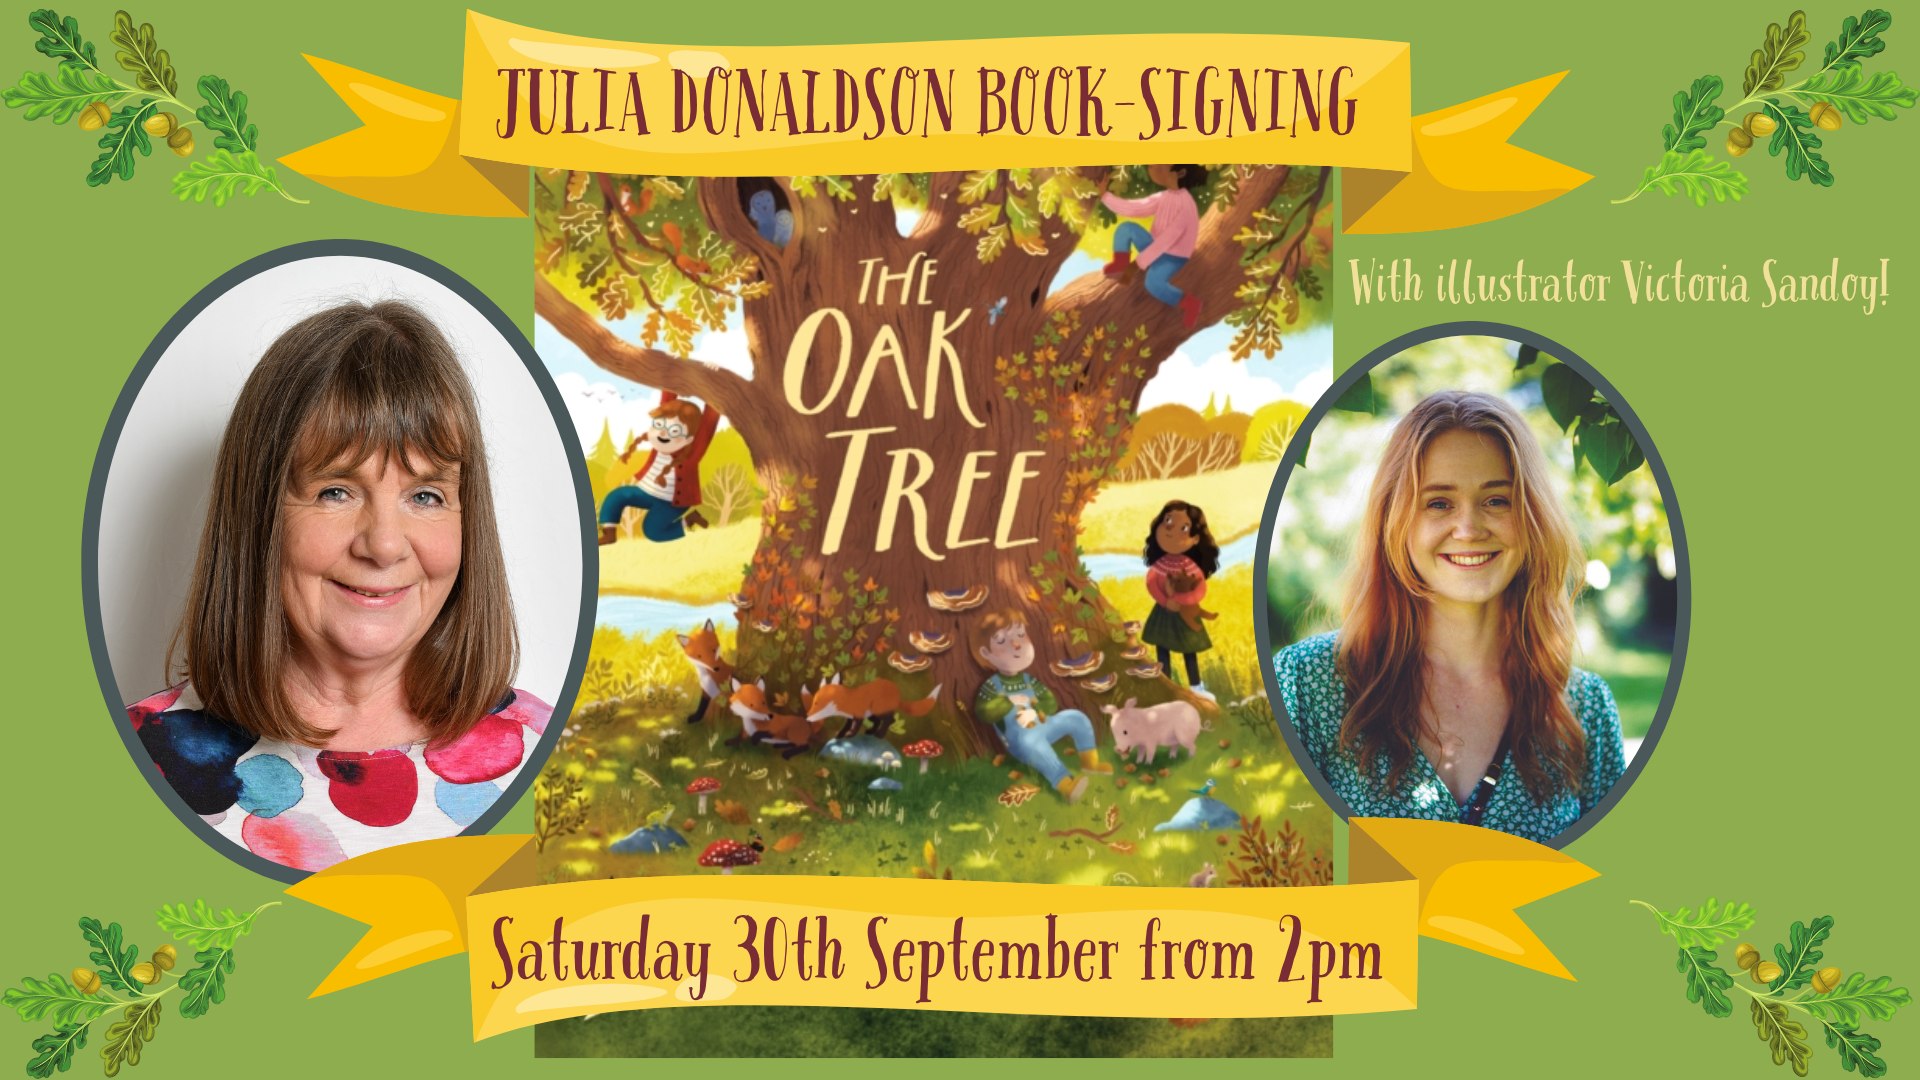 Julia Donaldson Book Signing for The Oak Tree